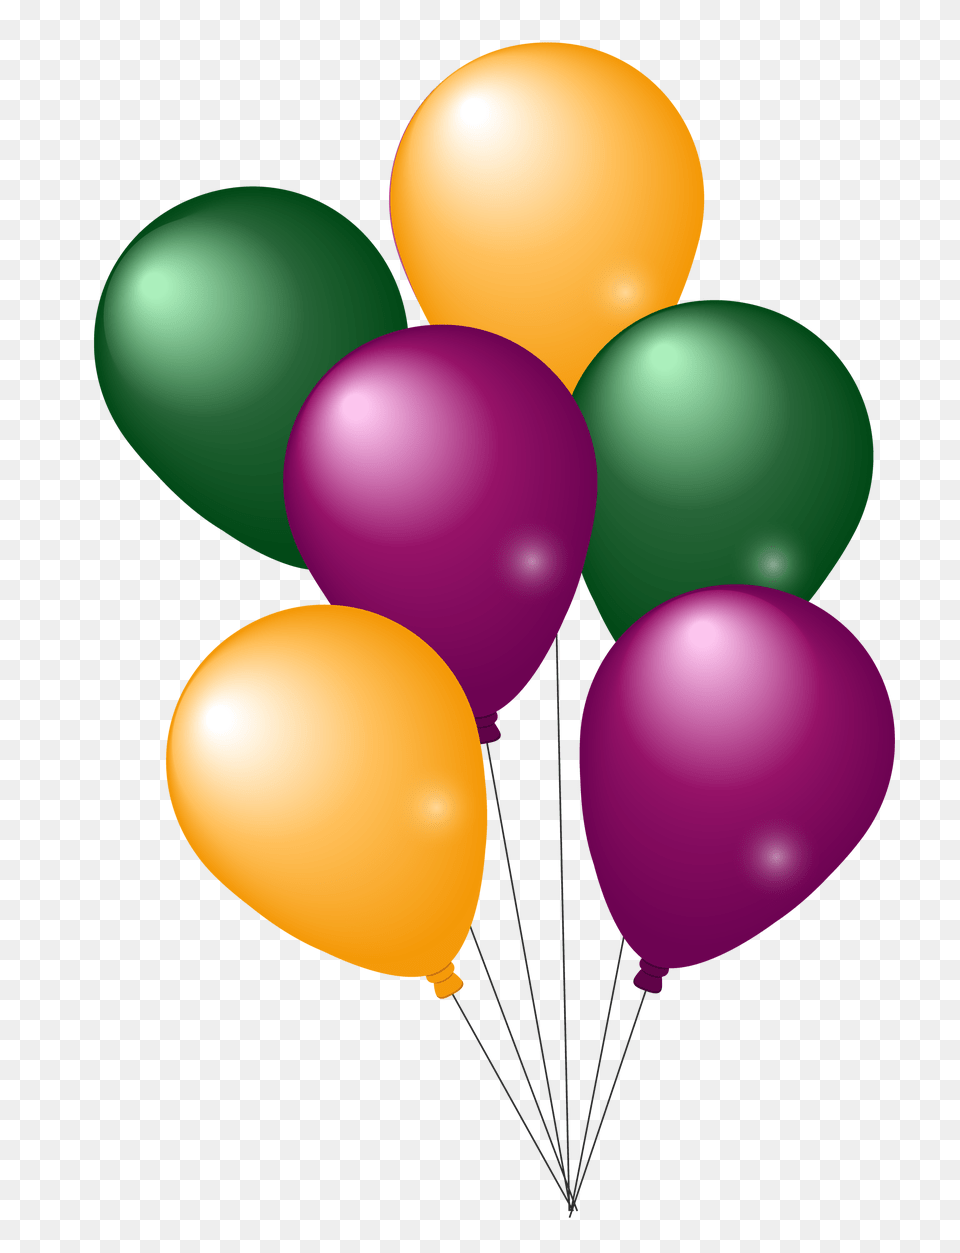 Pngpix Com Colorful Party Balloons Image, Balloon Free Png Download